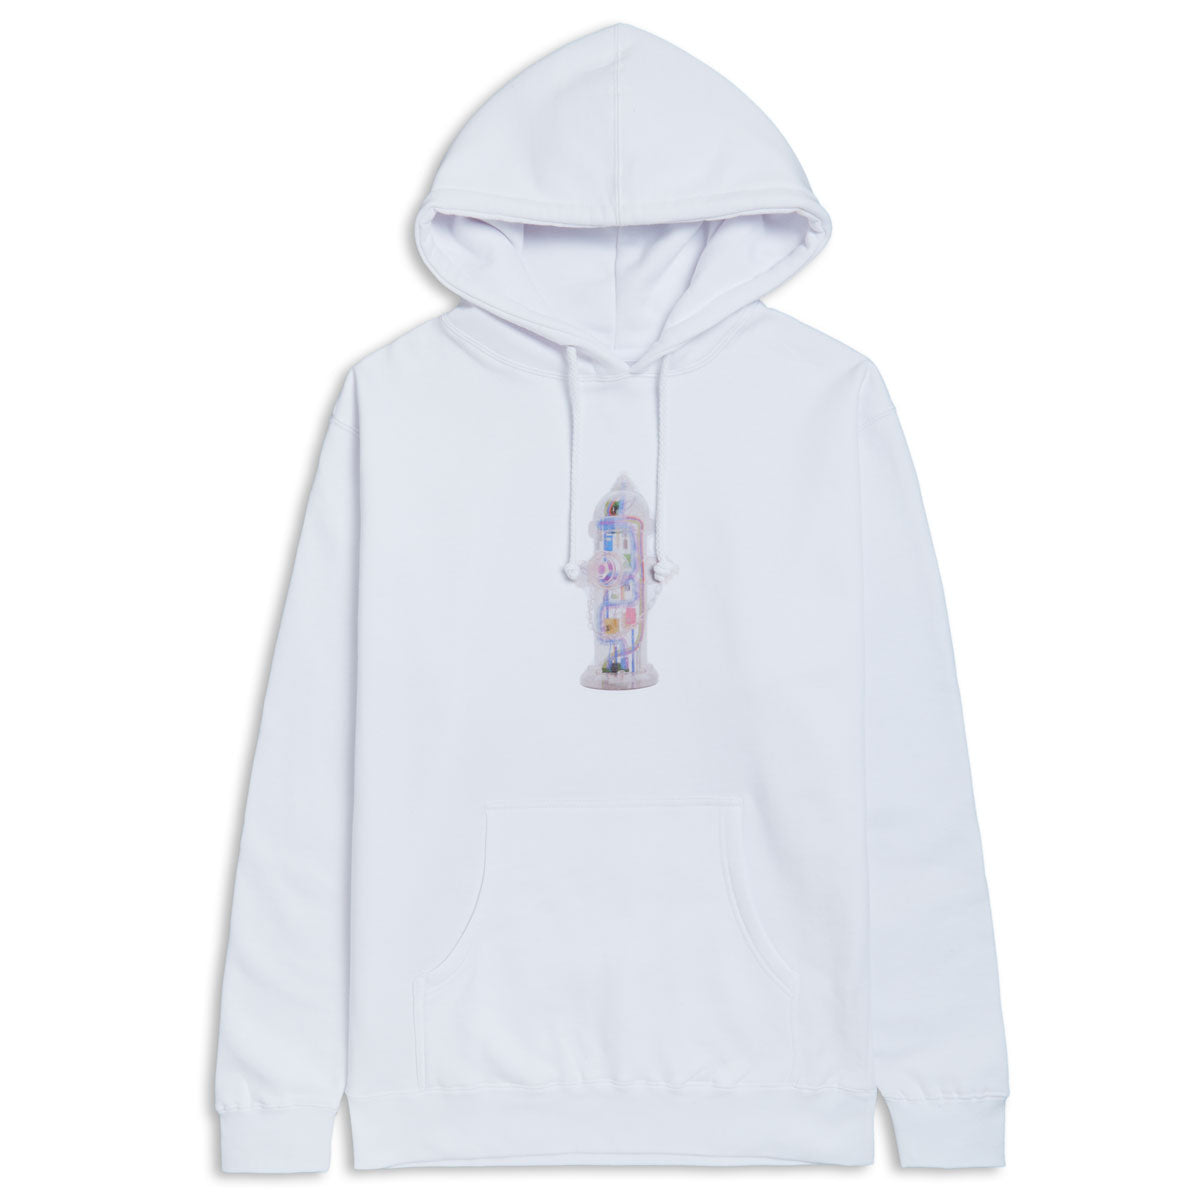 CCS Going Clear Hydrant Hoodie - White - LG image 1